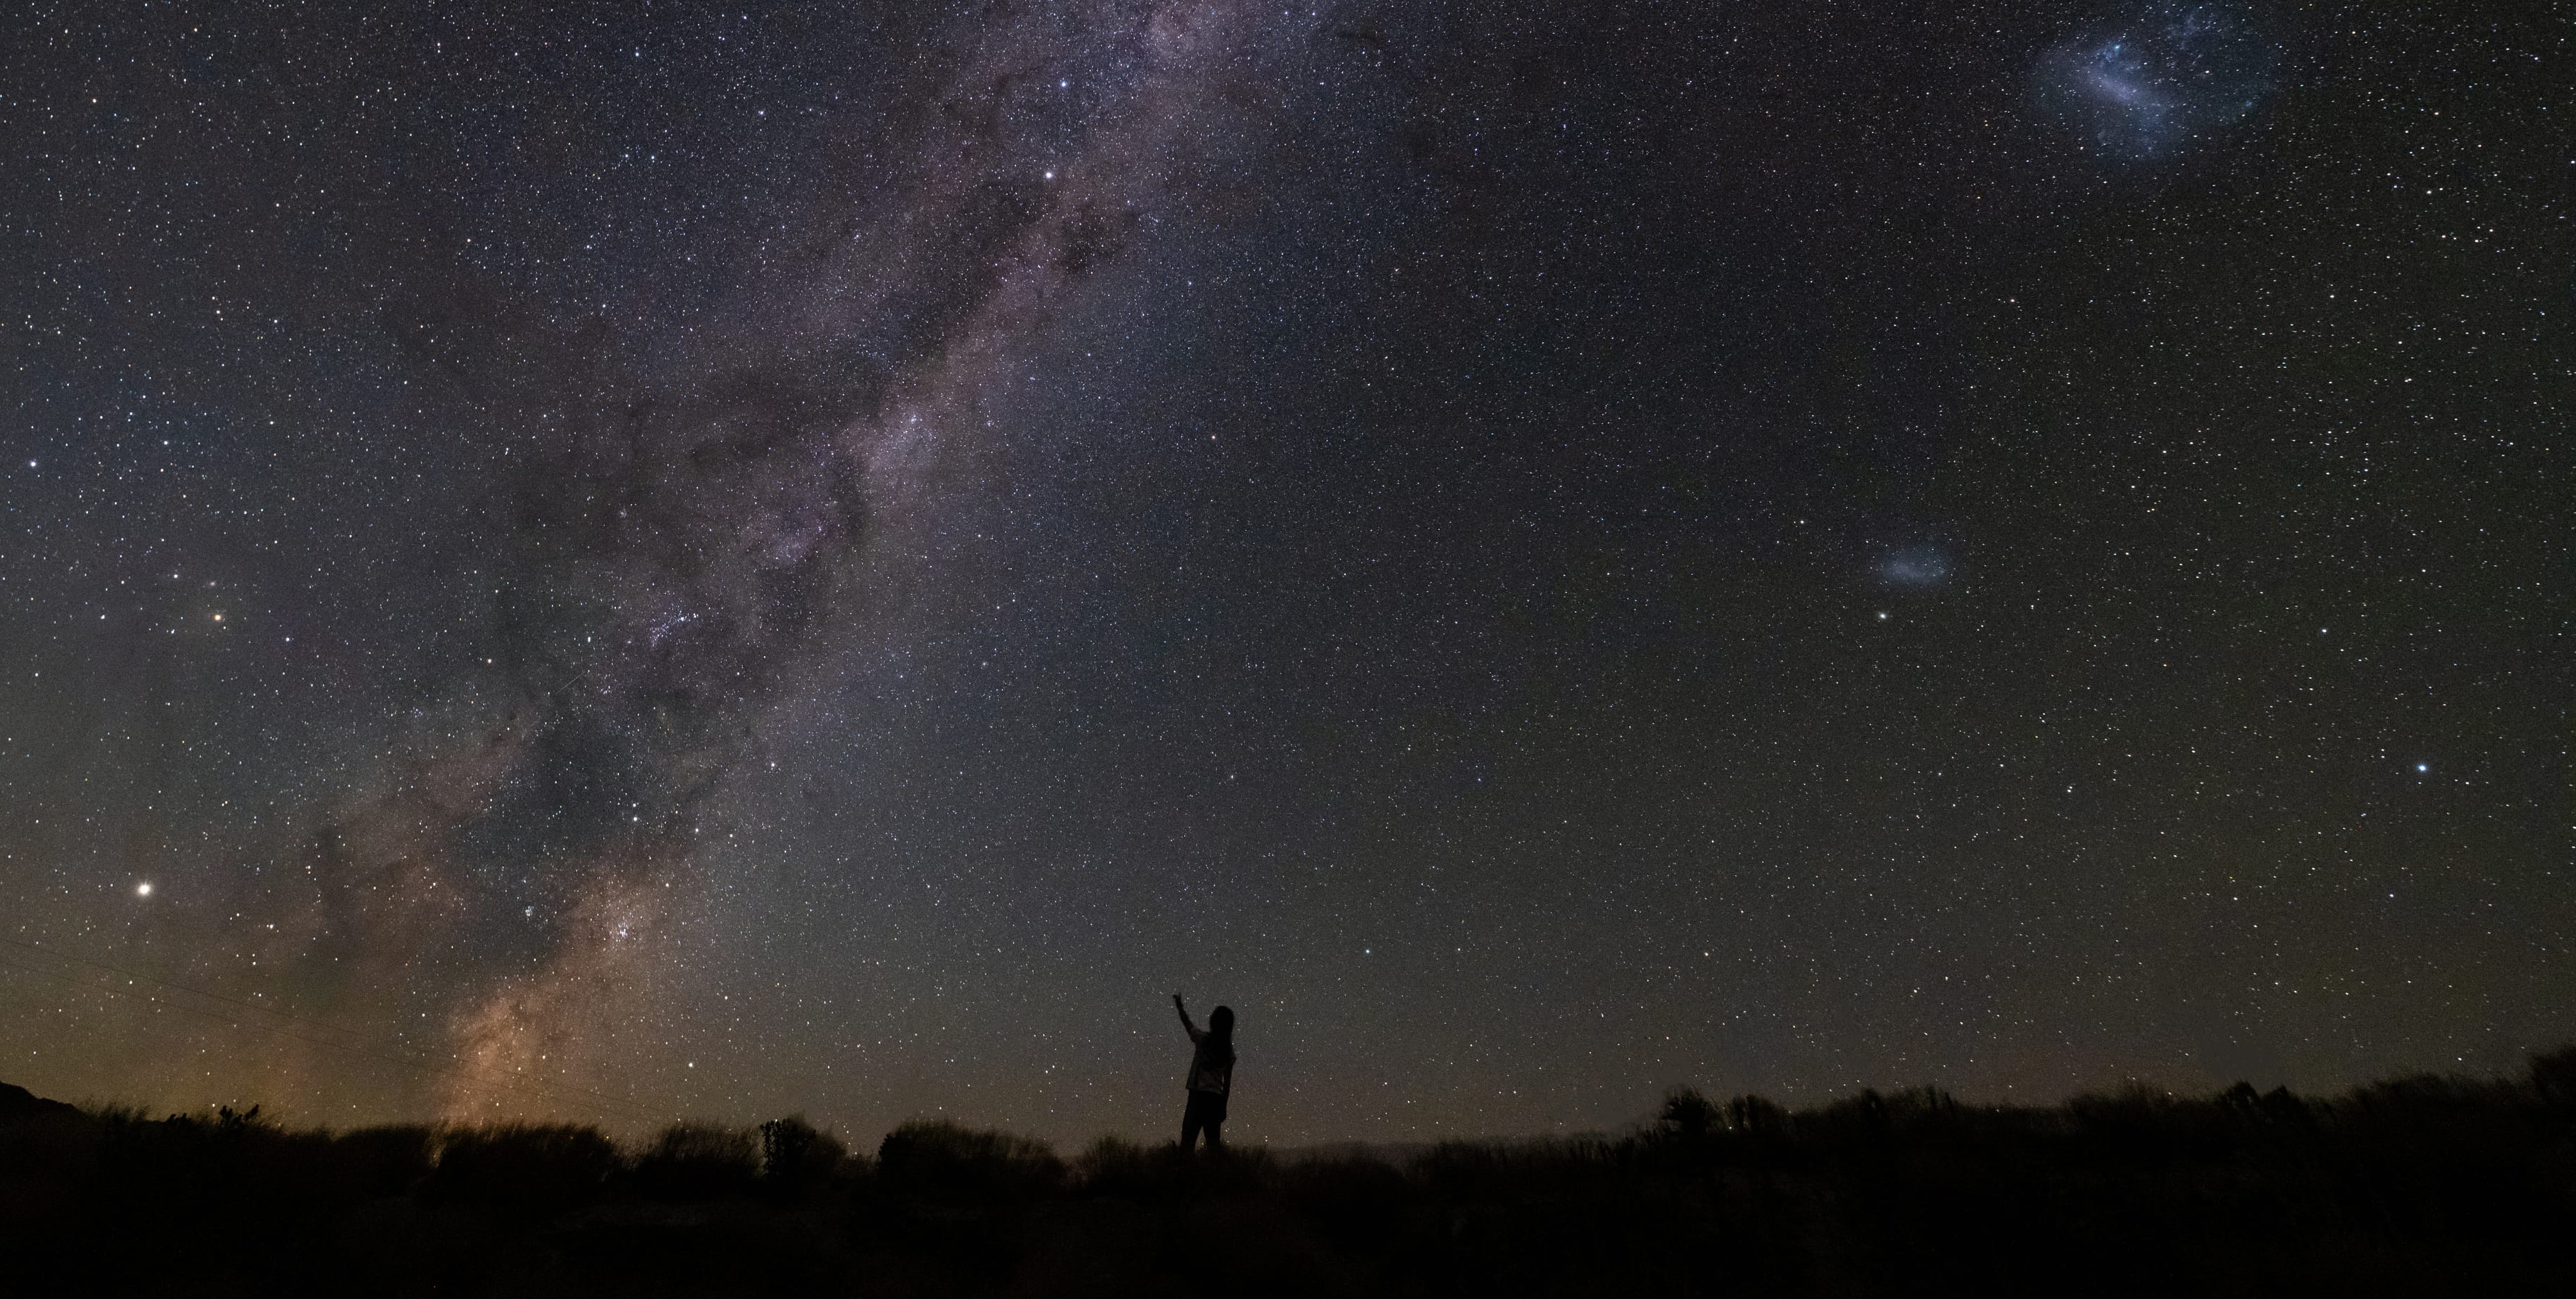 Person reaching up to the night sky with milky way in the sky